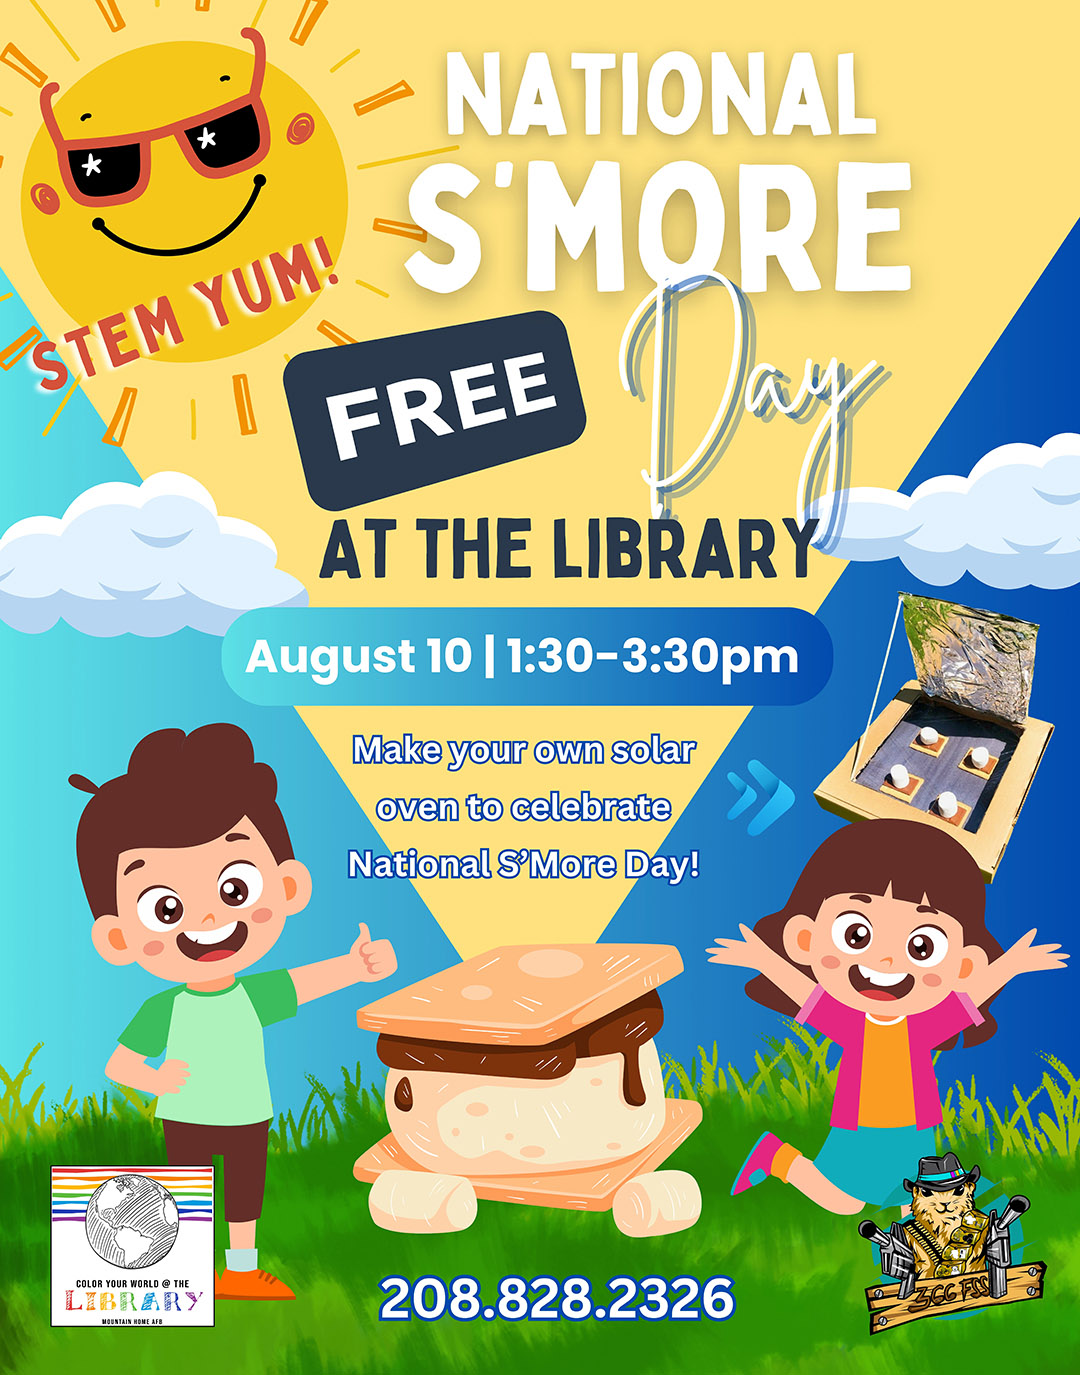 National S'more Free Day